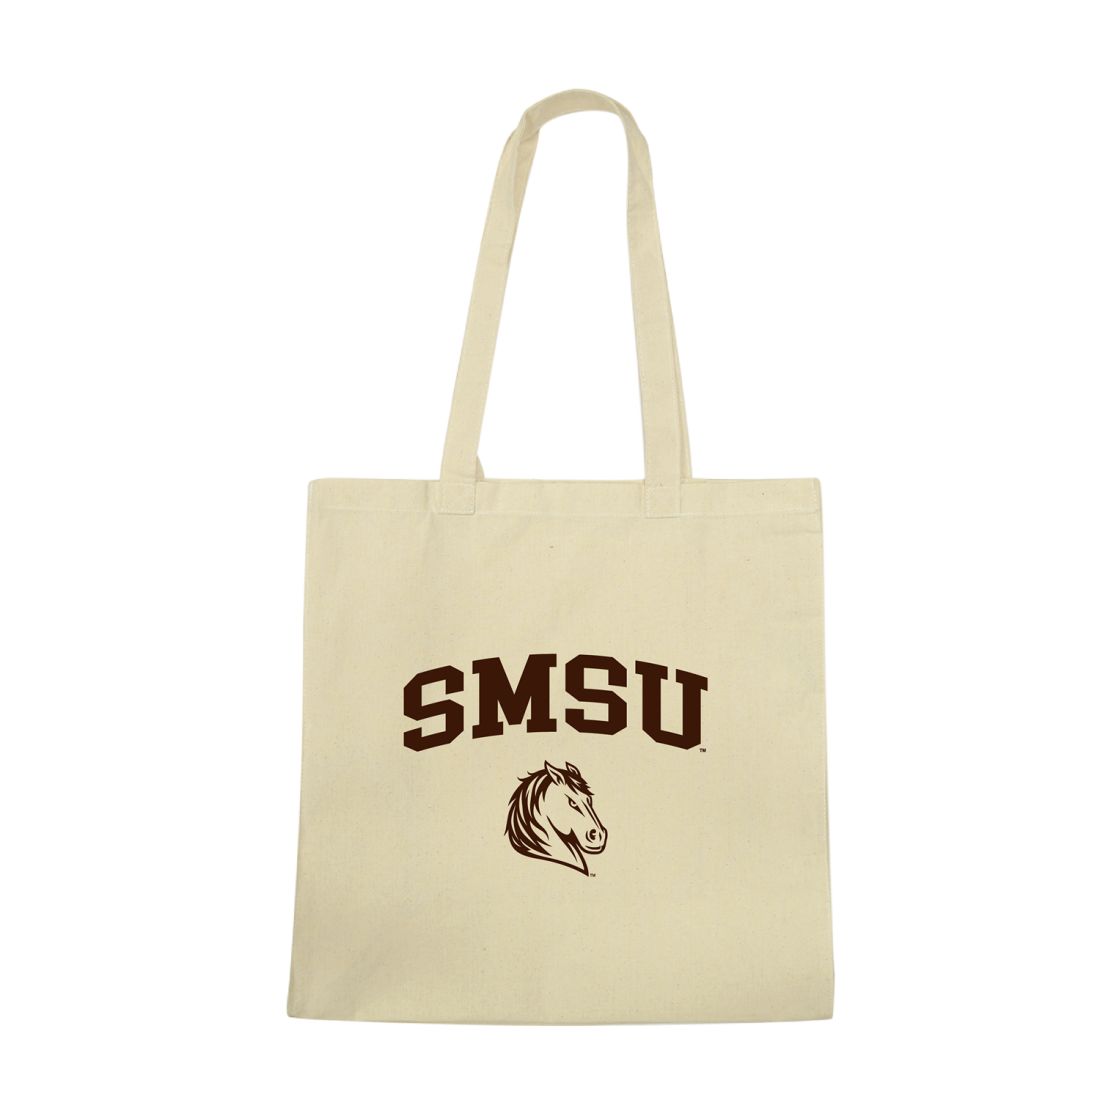 Southwest Minnesota State University Mustangs Institutional Seal Tote Bag